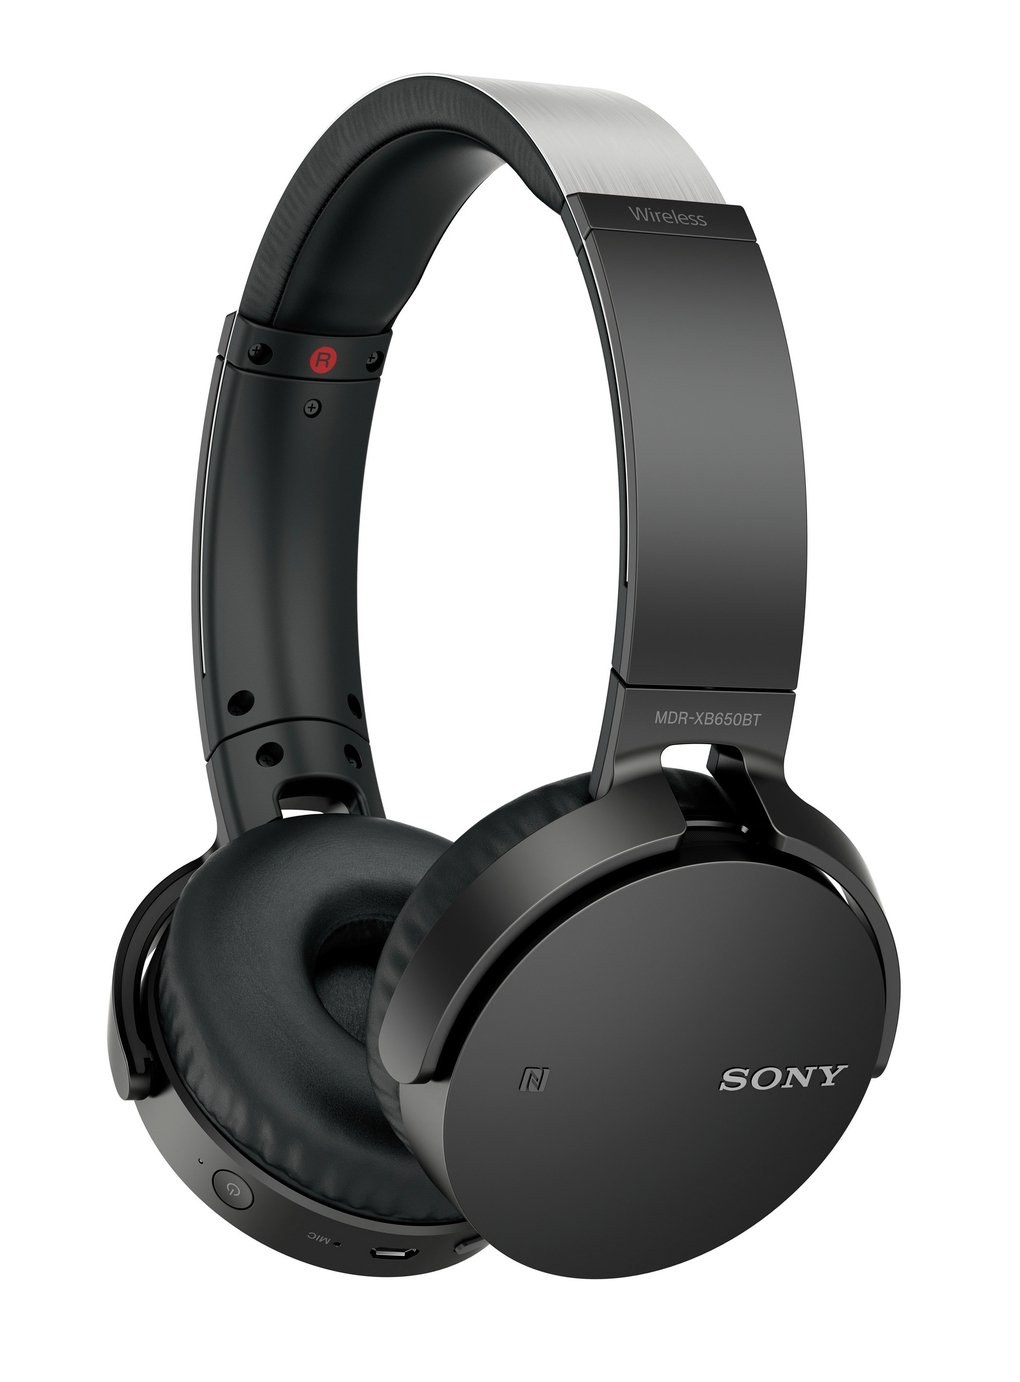 Sony MDR-XB650BT On-Ear Headphones review